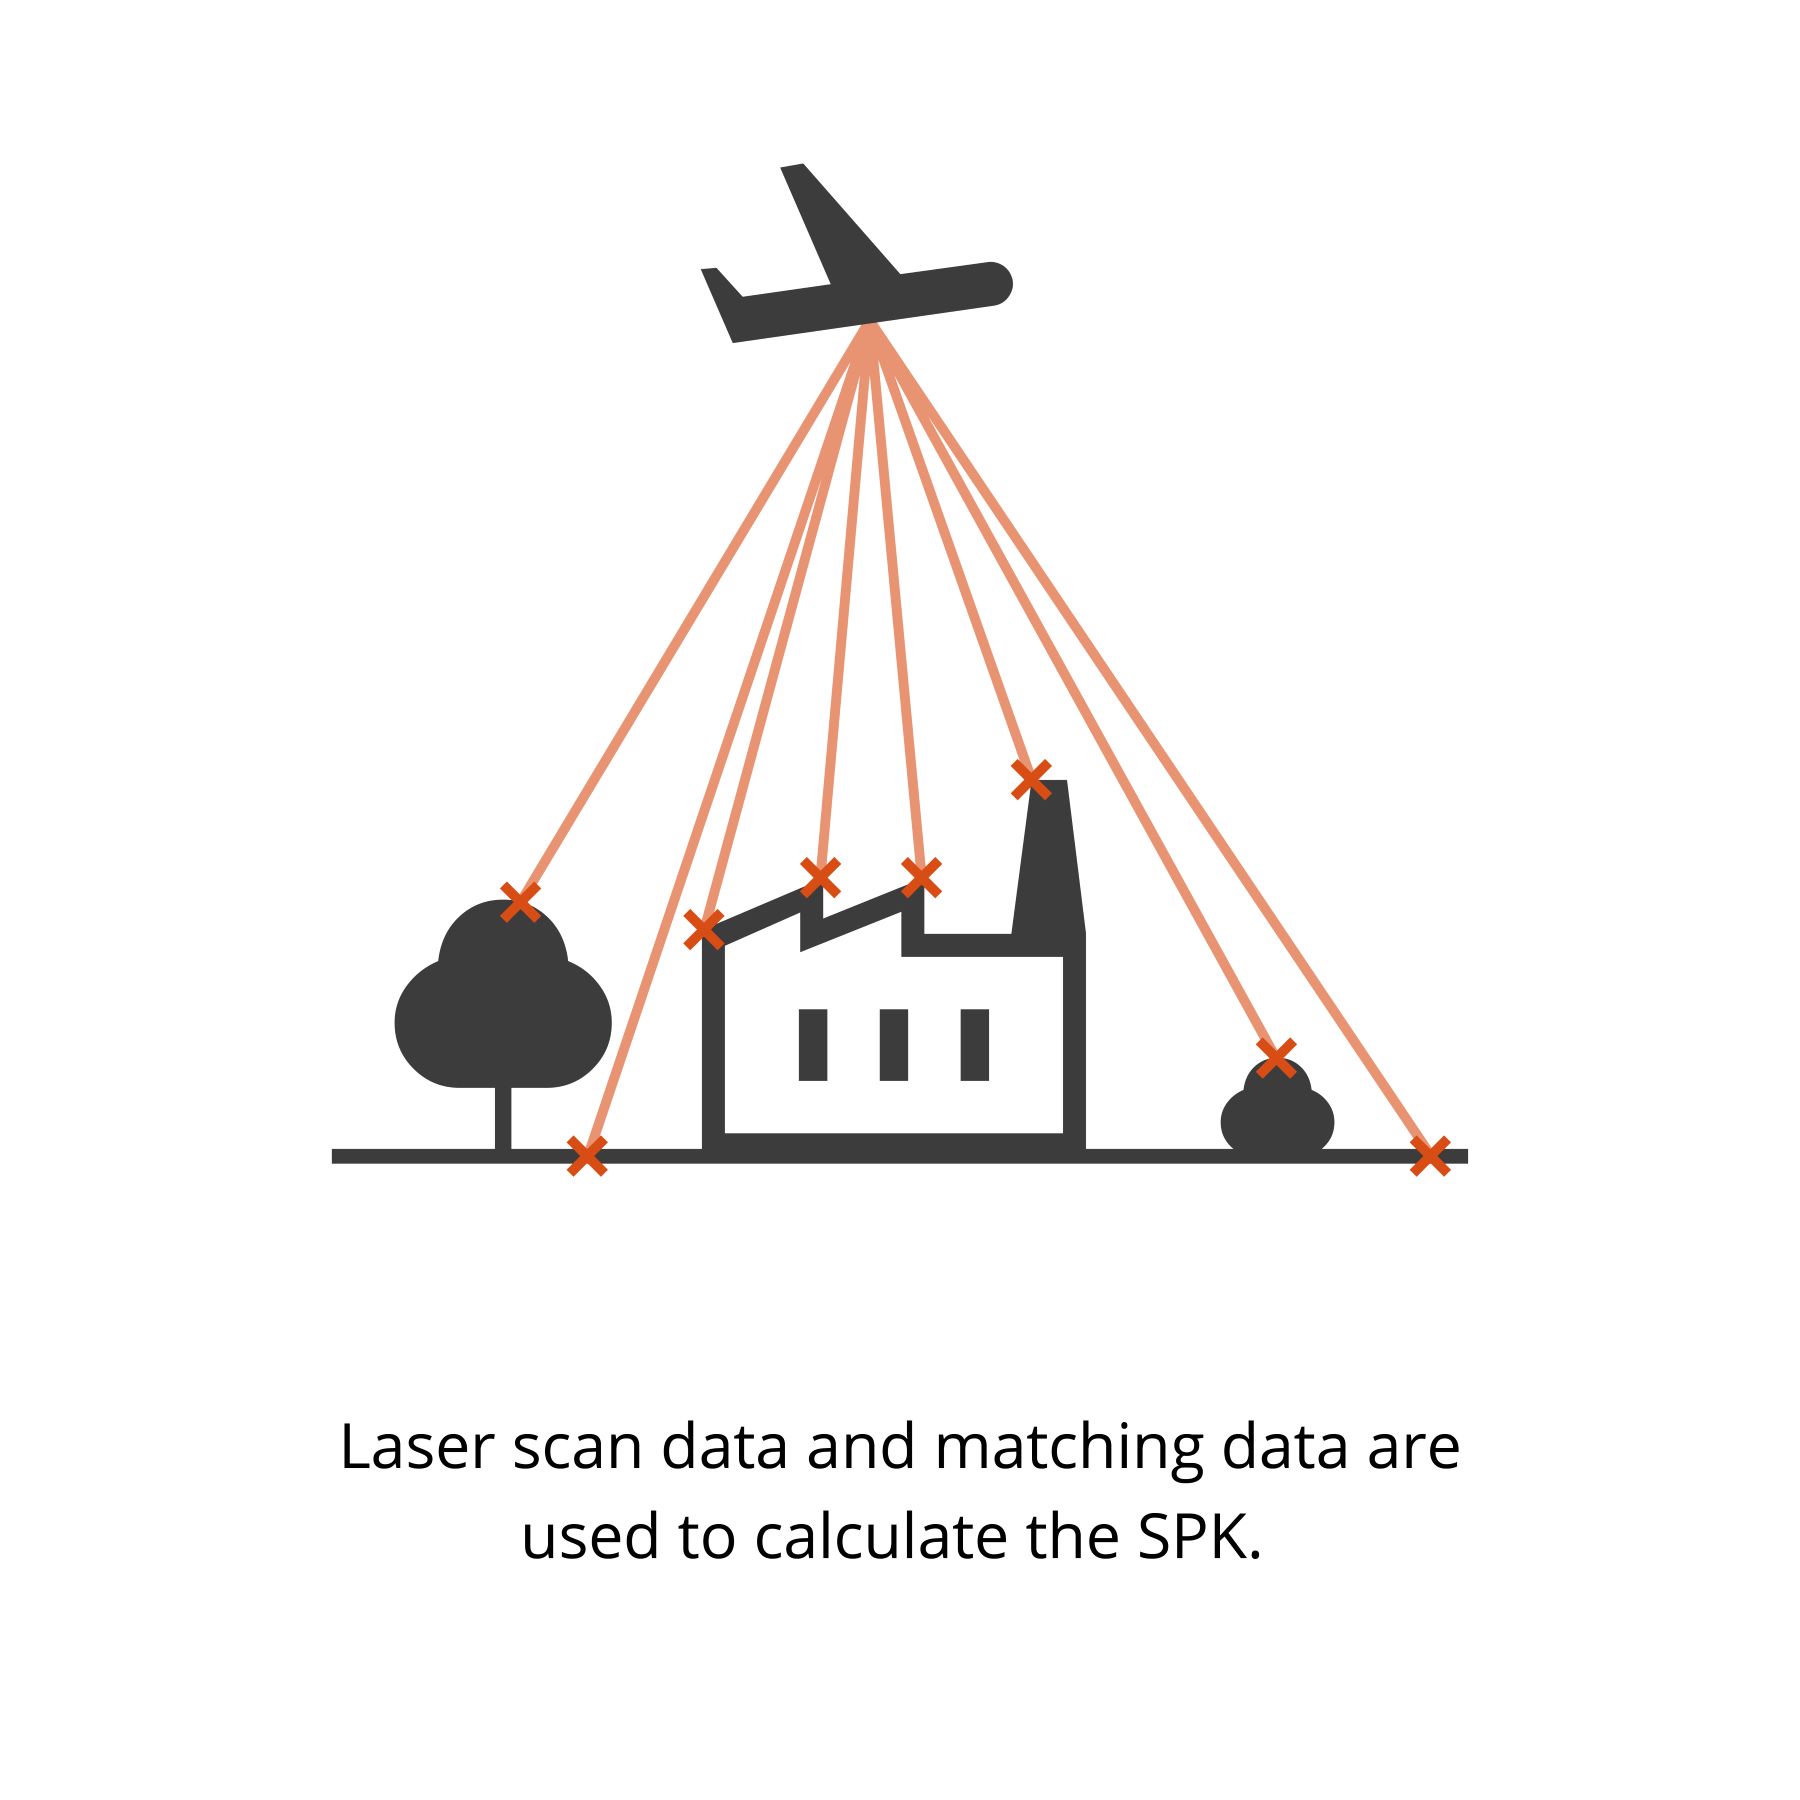 Laser scan data and matching data are used to calculate the SPK.